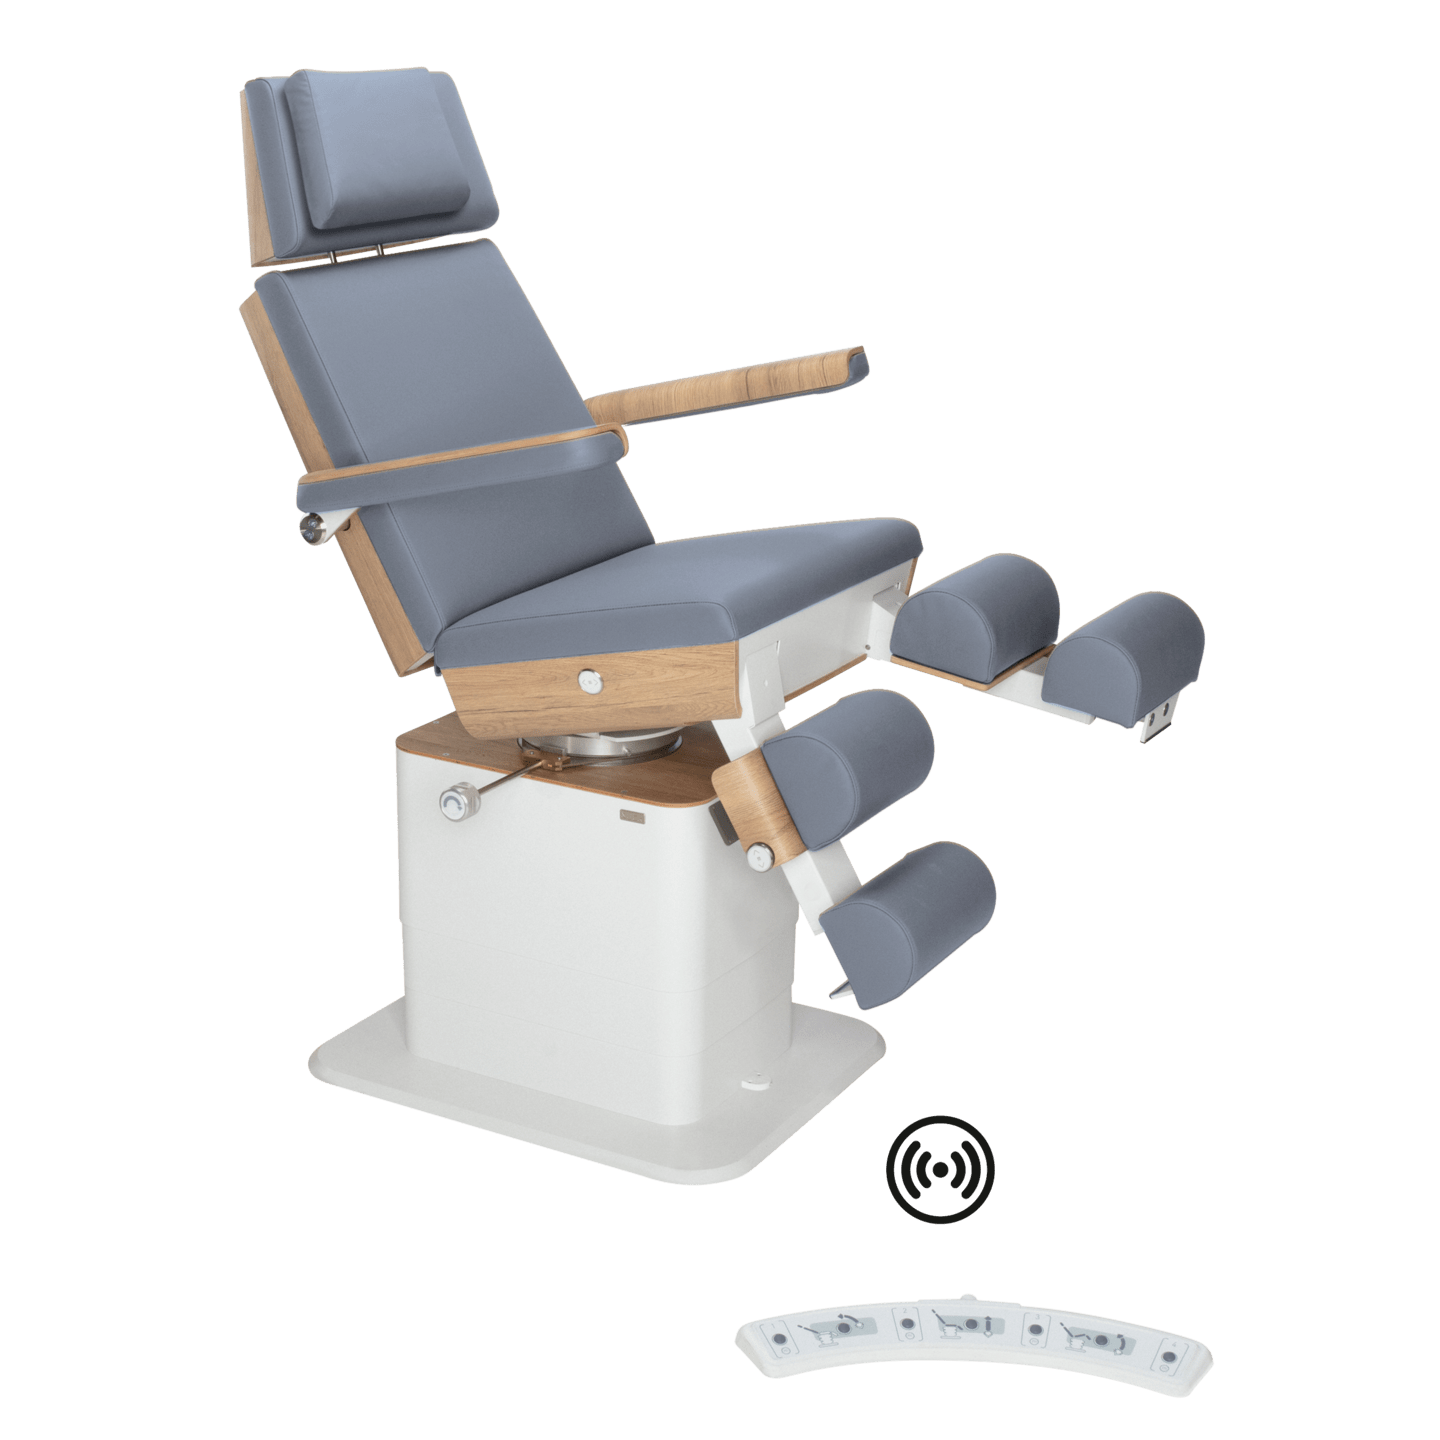 RUCK - RUCK® MOON Podiatry Chair/Couch with magnetic footrest extensions and patient control in ocean